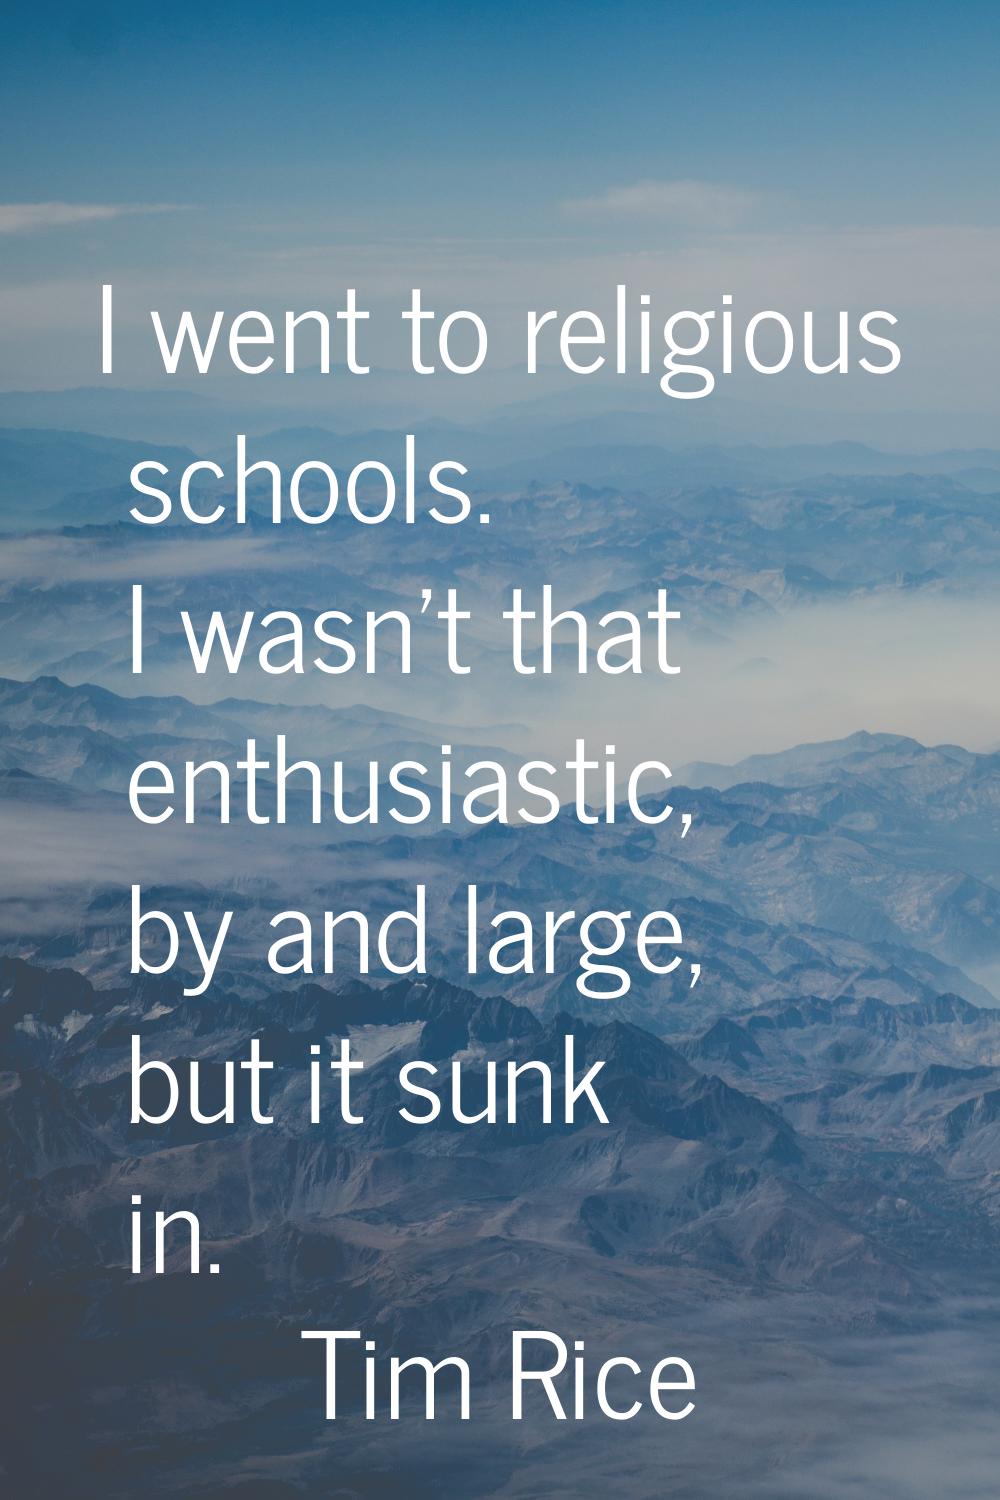 I went to religious schools. I wasn't that enthusiastic, by and large, but it sunk in.